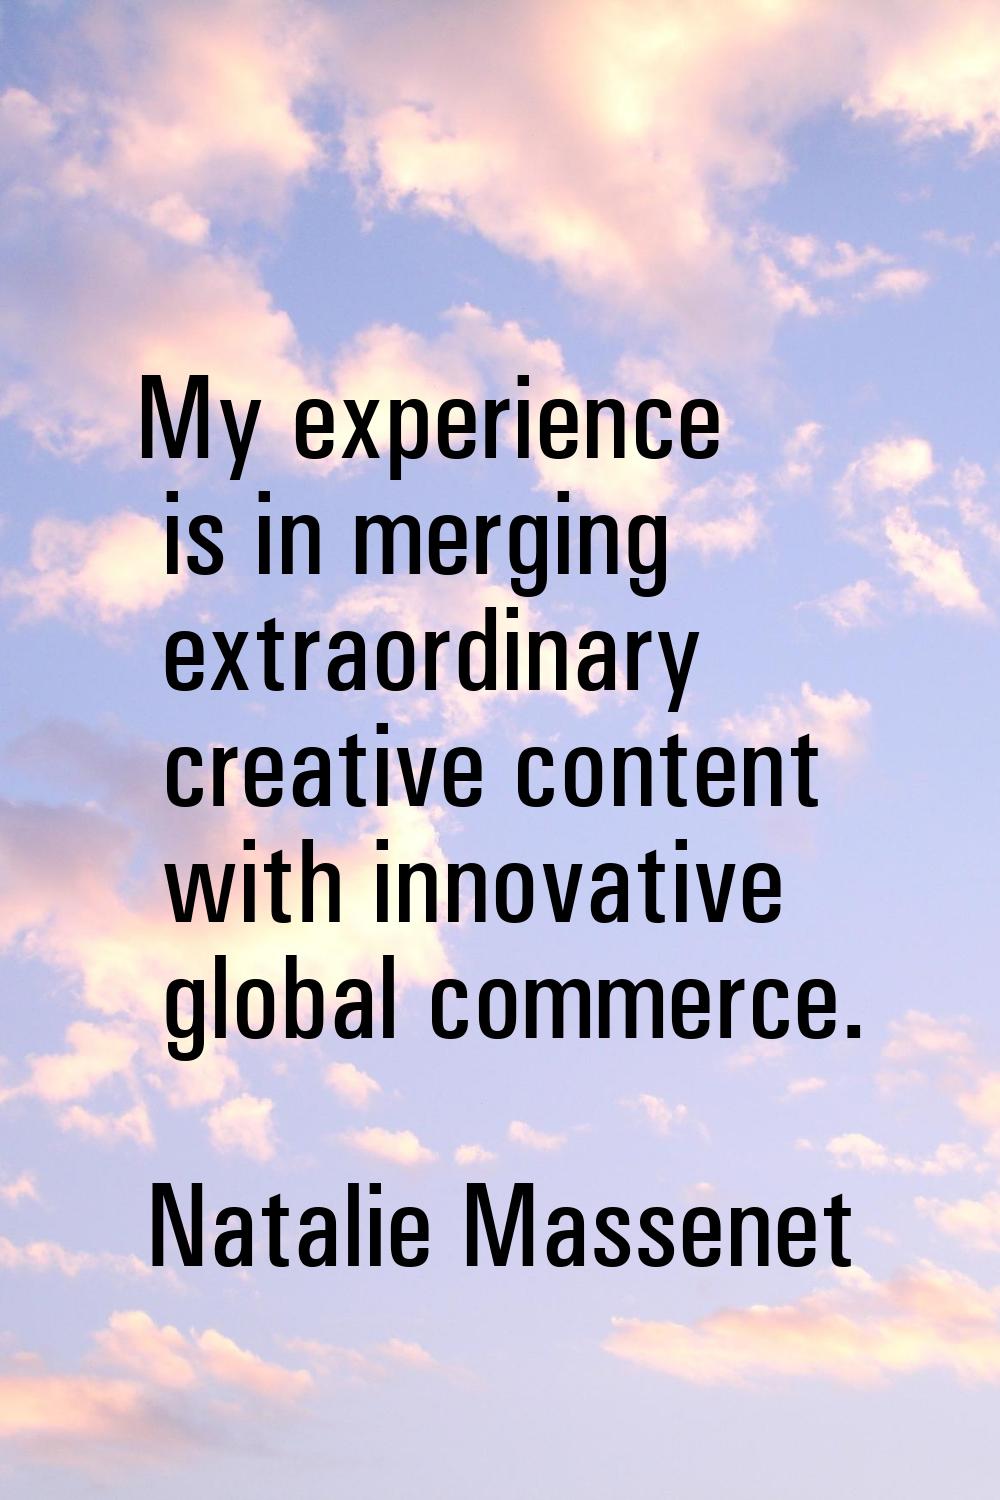 My experience is in merging extraordinary creative content with innovative global commerce.